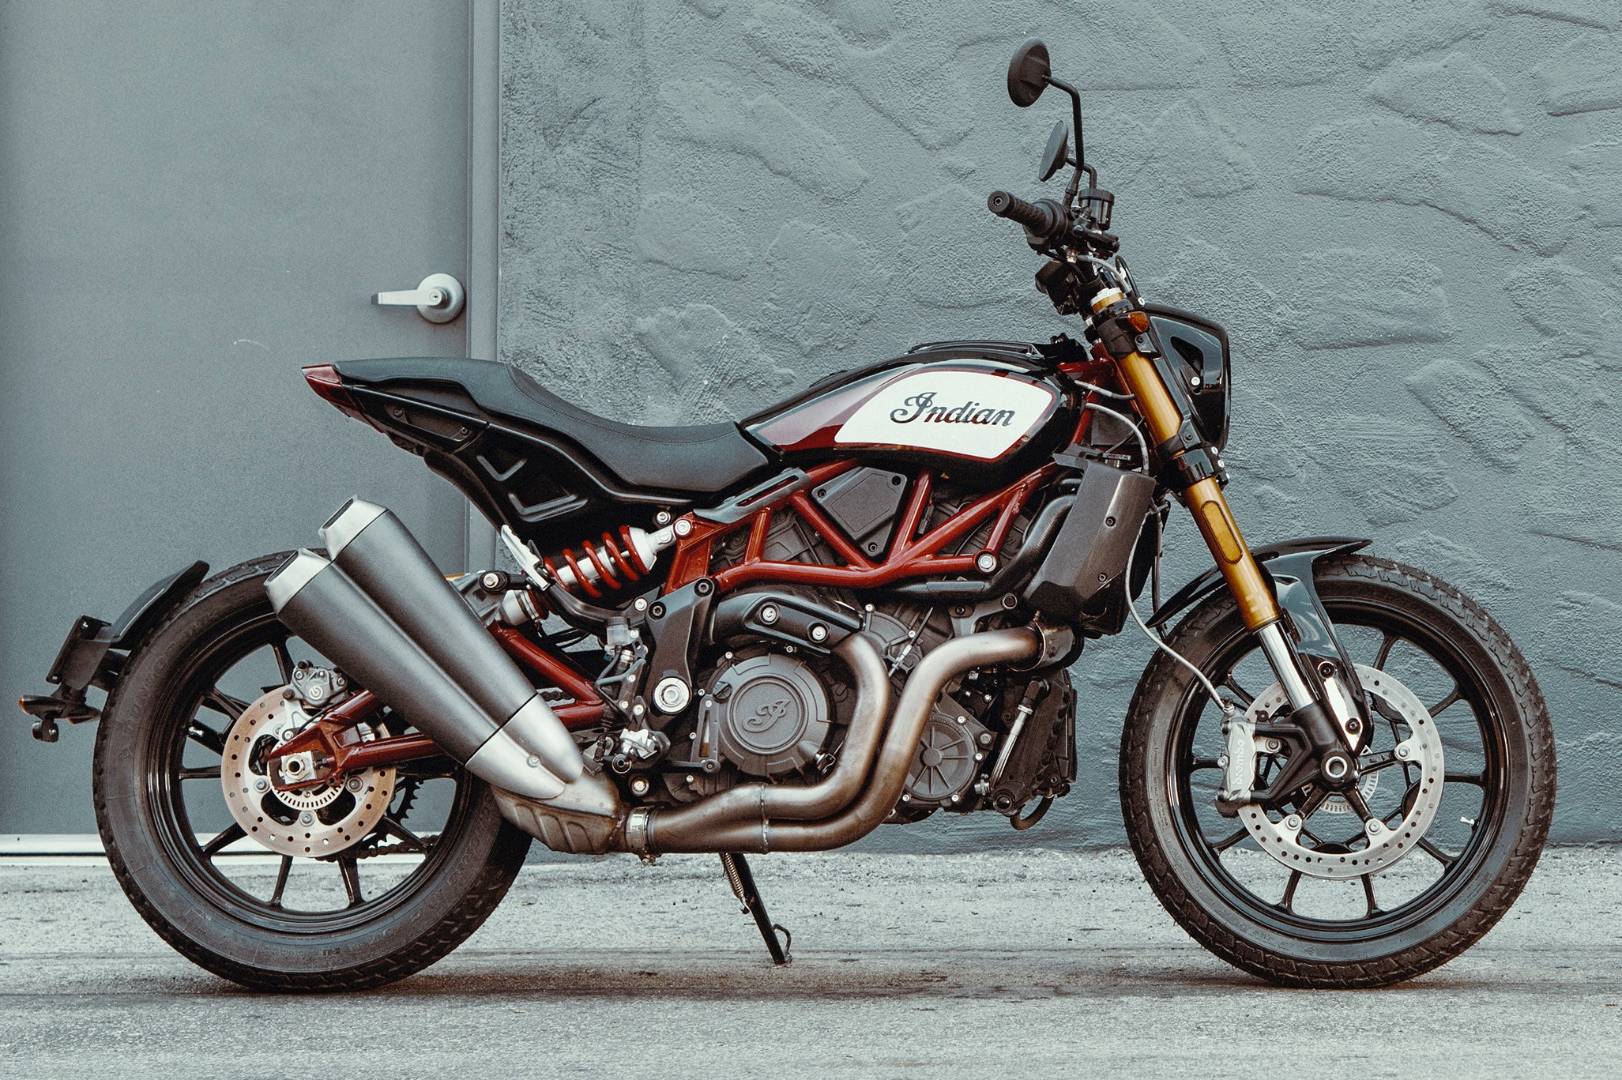 New 2019 Indian FTR™ 1200 S Motorcycles in Lowell, NC Stock Number